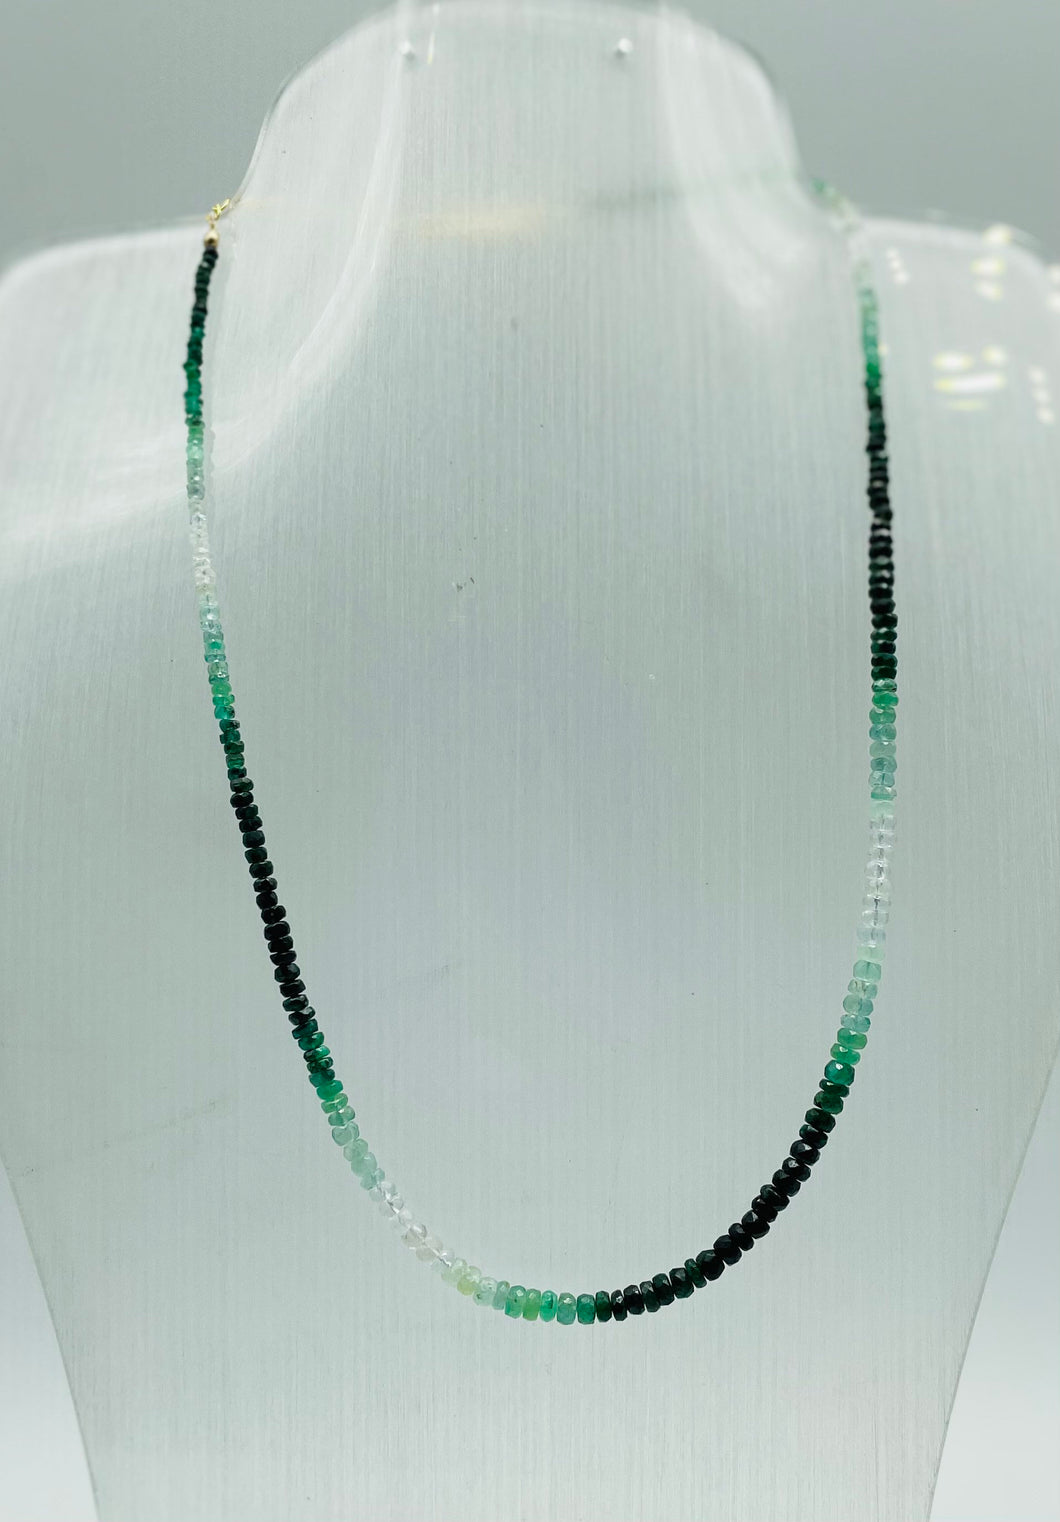 stone beads necklace,emerald necklace,bead necklace,gem stone necklace,silver necklace,emerald shaded necklace,cut stone necklace